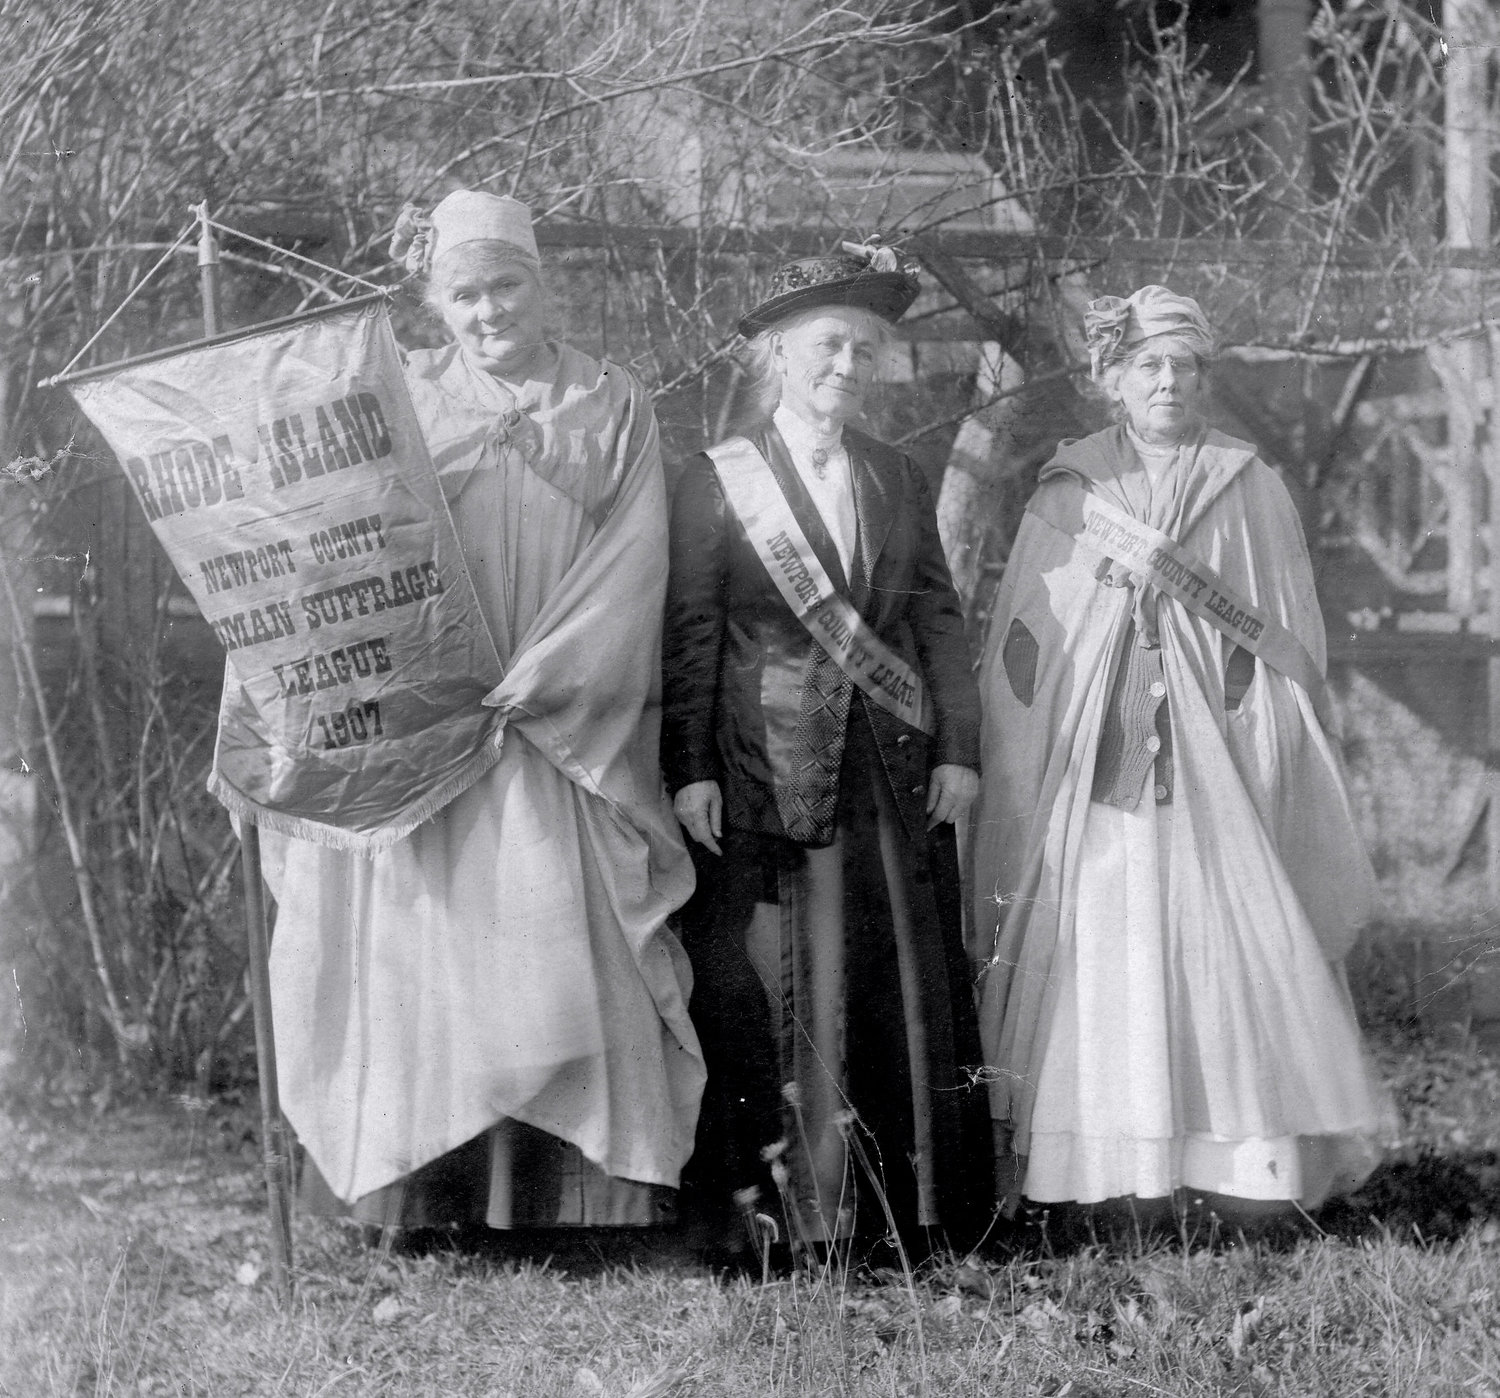 This Portsmouth Historical Society photo, taken in 1907 by the Portsmouth artist and reformist Sarah Eddy, shows (from left) Letitia Lawton, Cora Mitchel, and Emeline Eldredge. Ms. Mitchel founded the Newport County Woman Suffrage League that year.